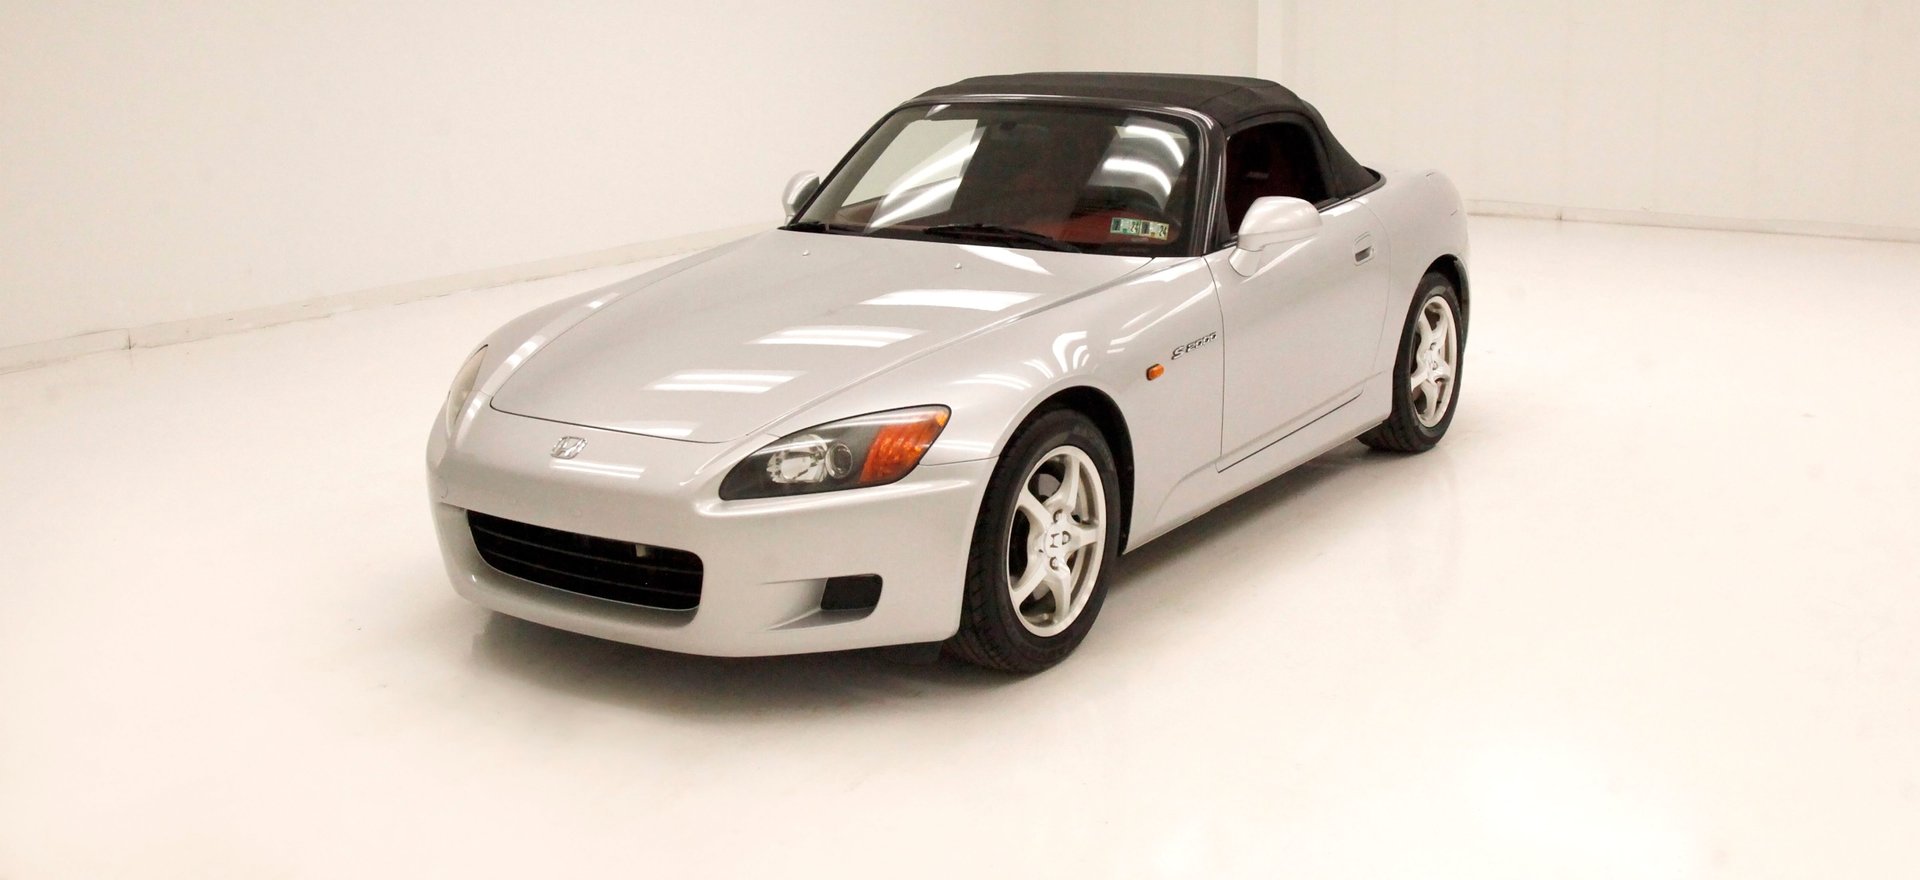 Even at 300,000 Miles, My Honda S2000 Is a Serious Track Weapon